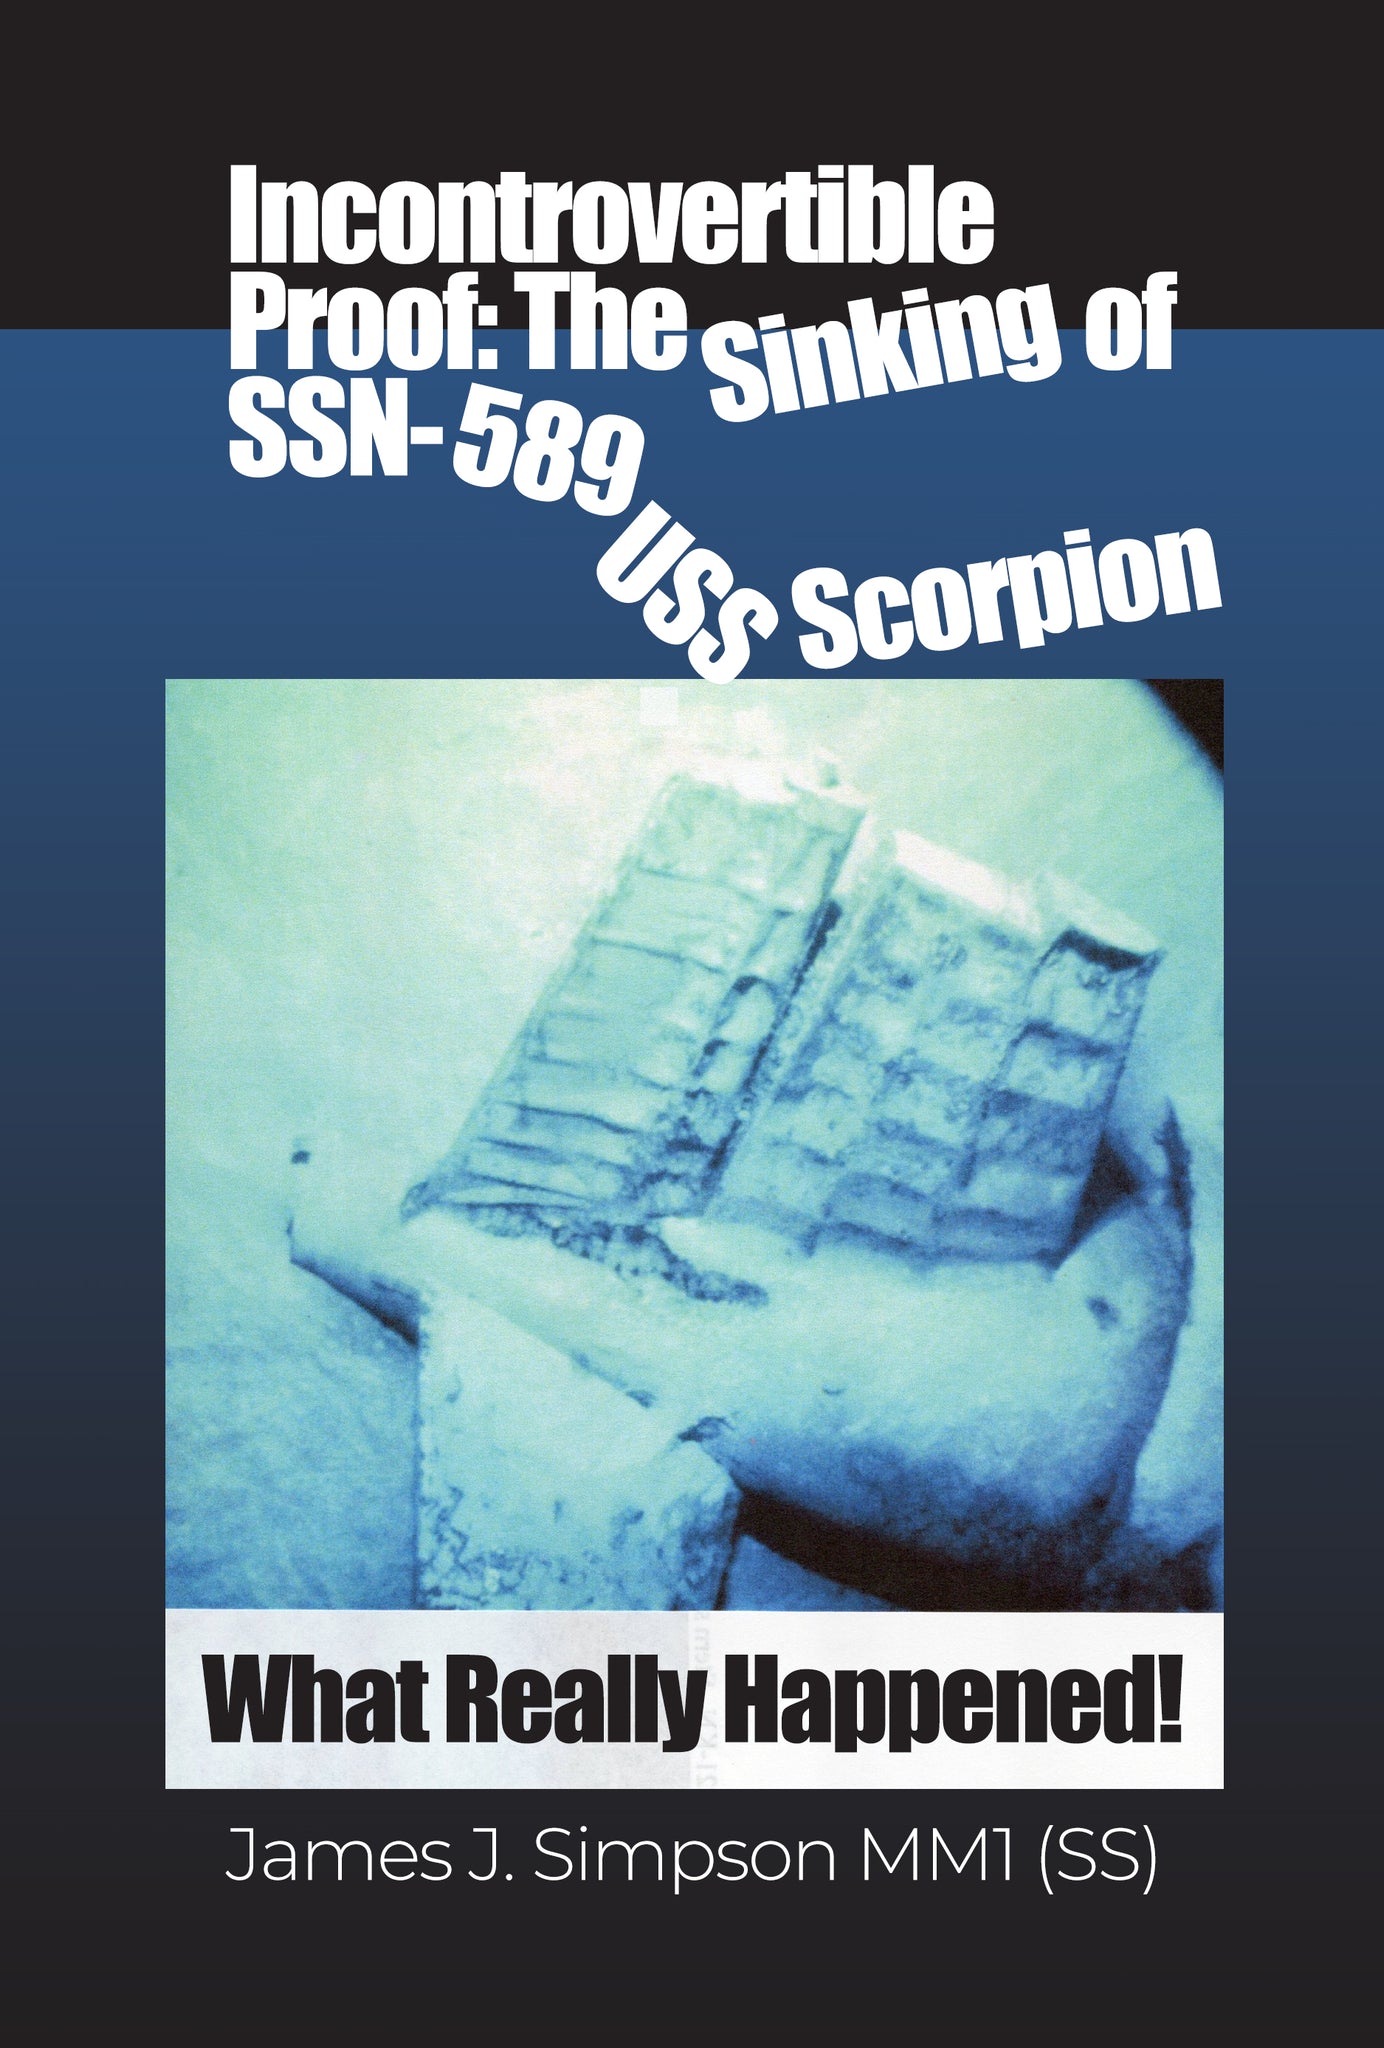 Incontrovertible Proof: The Sinking of SSN-589 USS Scorpion: What Really Happened!